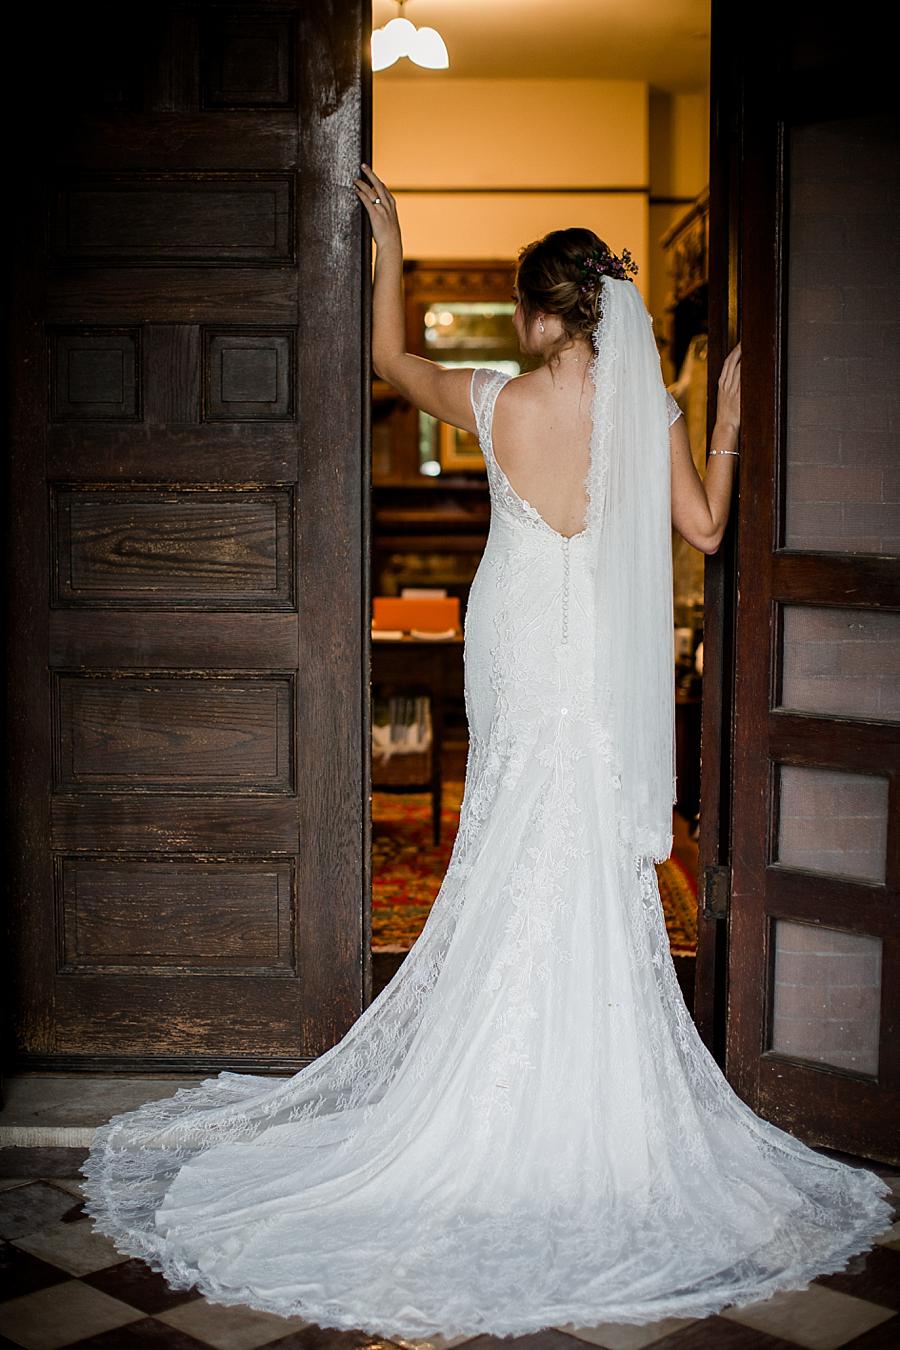 Bride in doorway at this Historic Westwood Bridal session by Knoxville Wedding Photographer, Amanda May Photos.